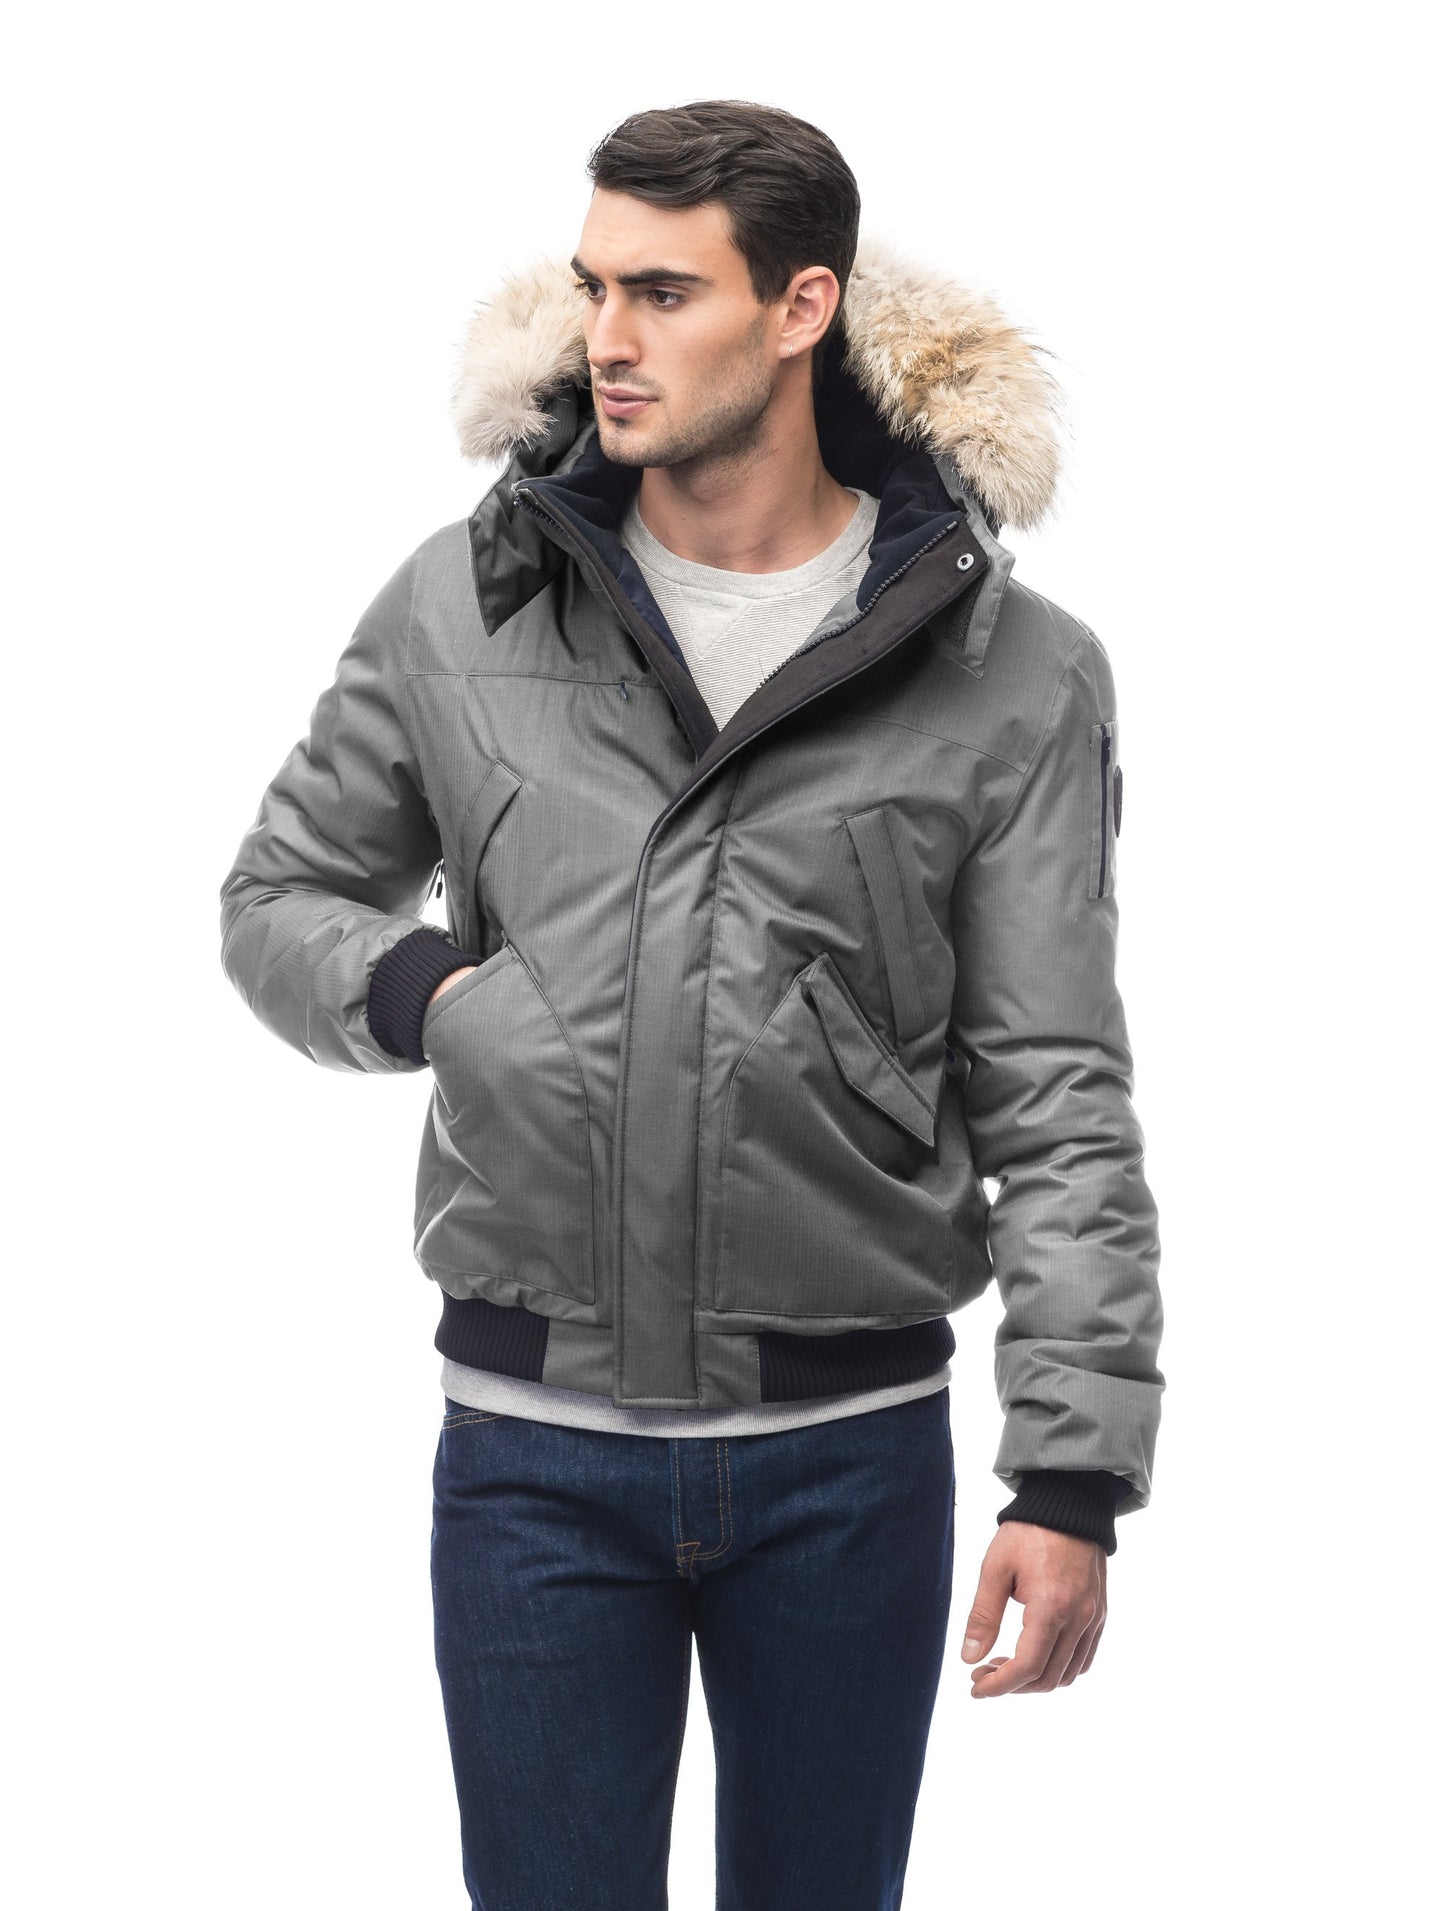 Men's classic down filled bomber jacket with a down filledÃ‚Â hood that features a removable coyote fur trim and concealed moldable framing wire in Concrete